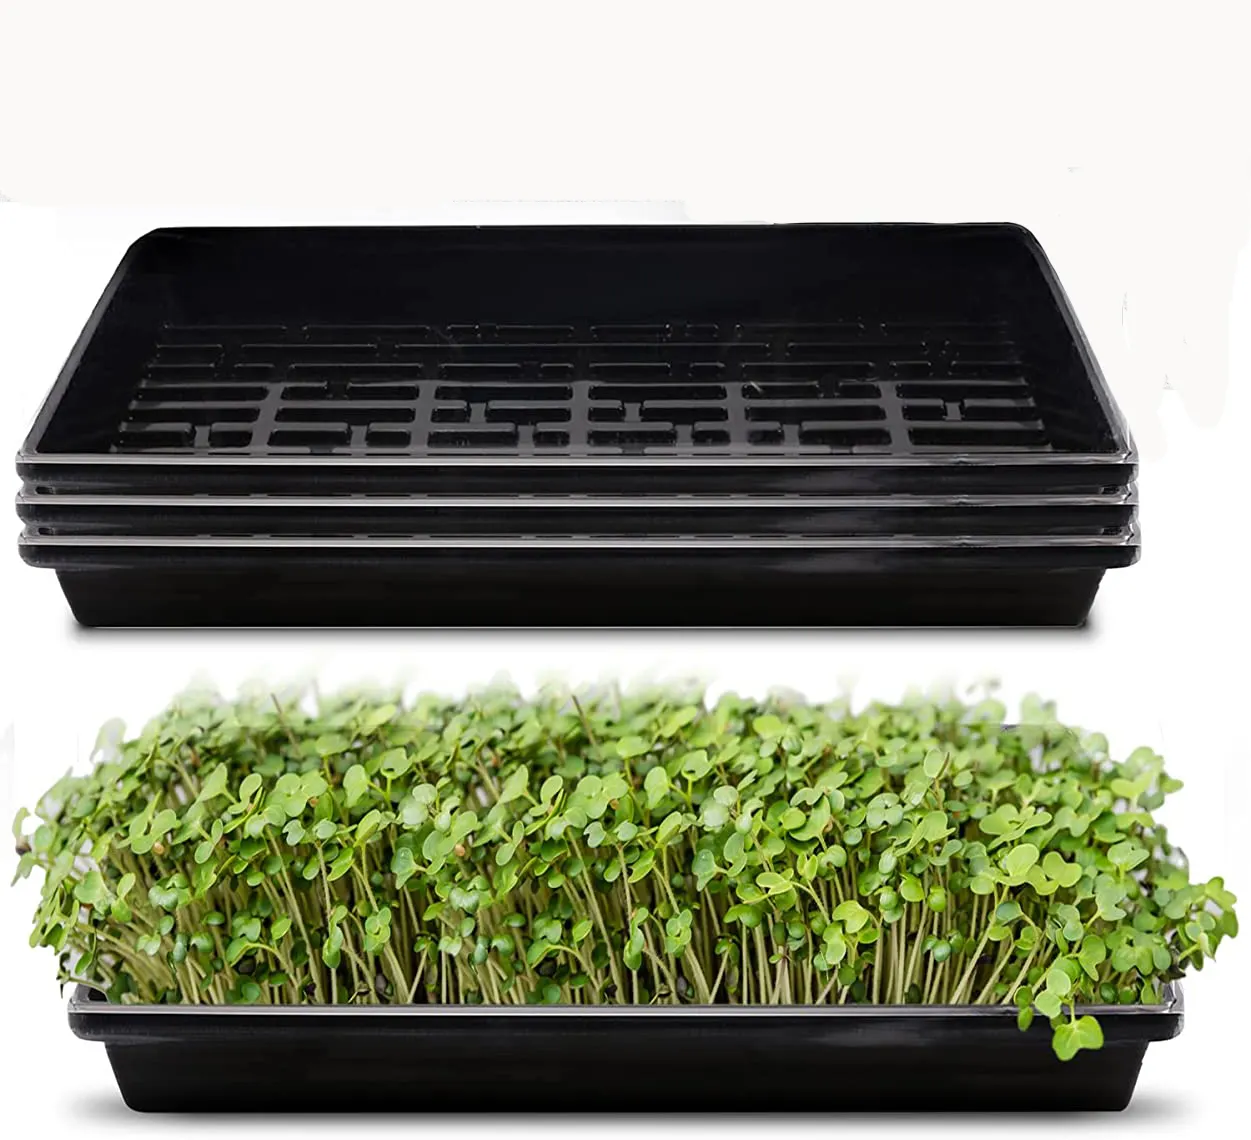 1020 Extra Strength tray No Holes for Propagation Seed Starter, Plant Germination, Fodder, Microgreens